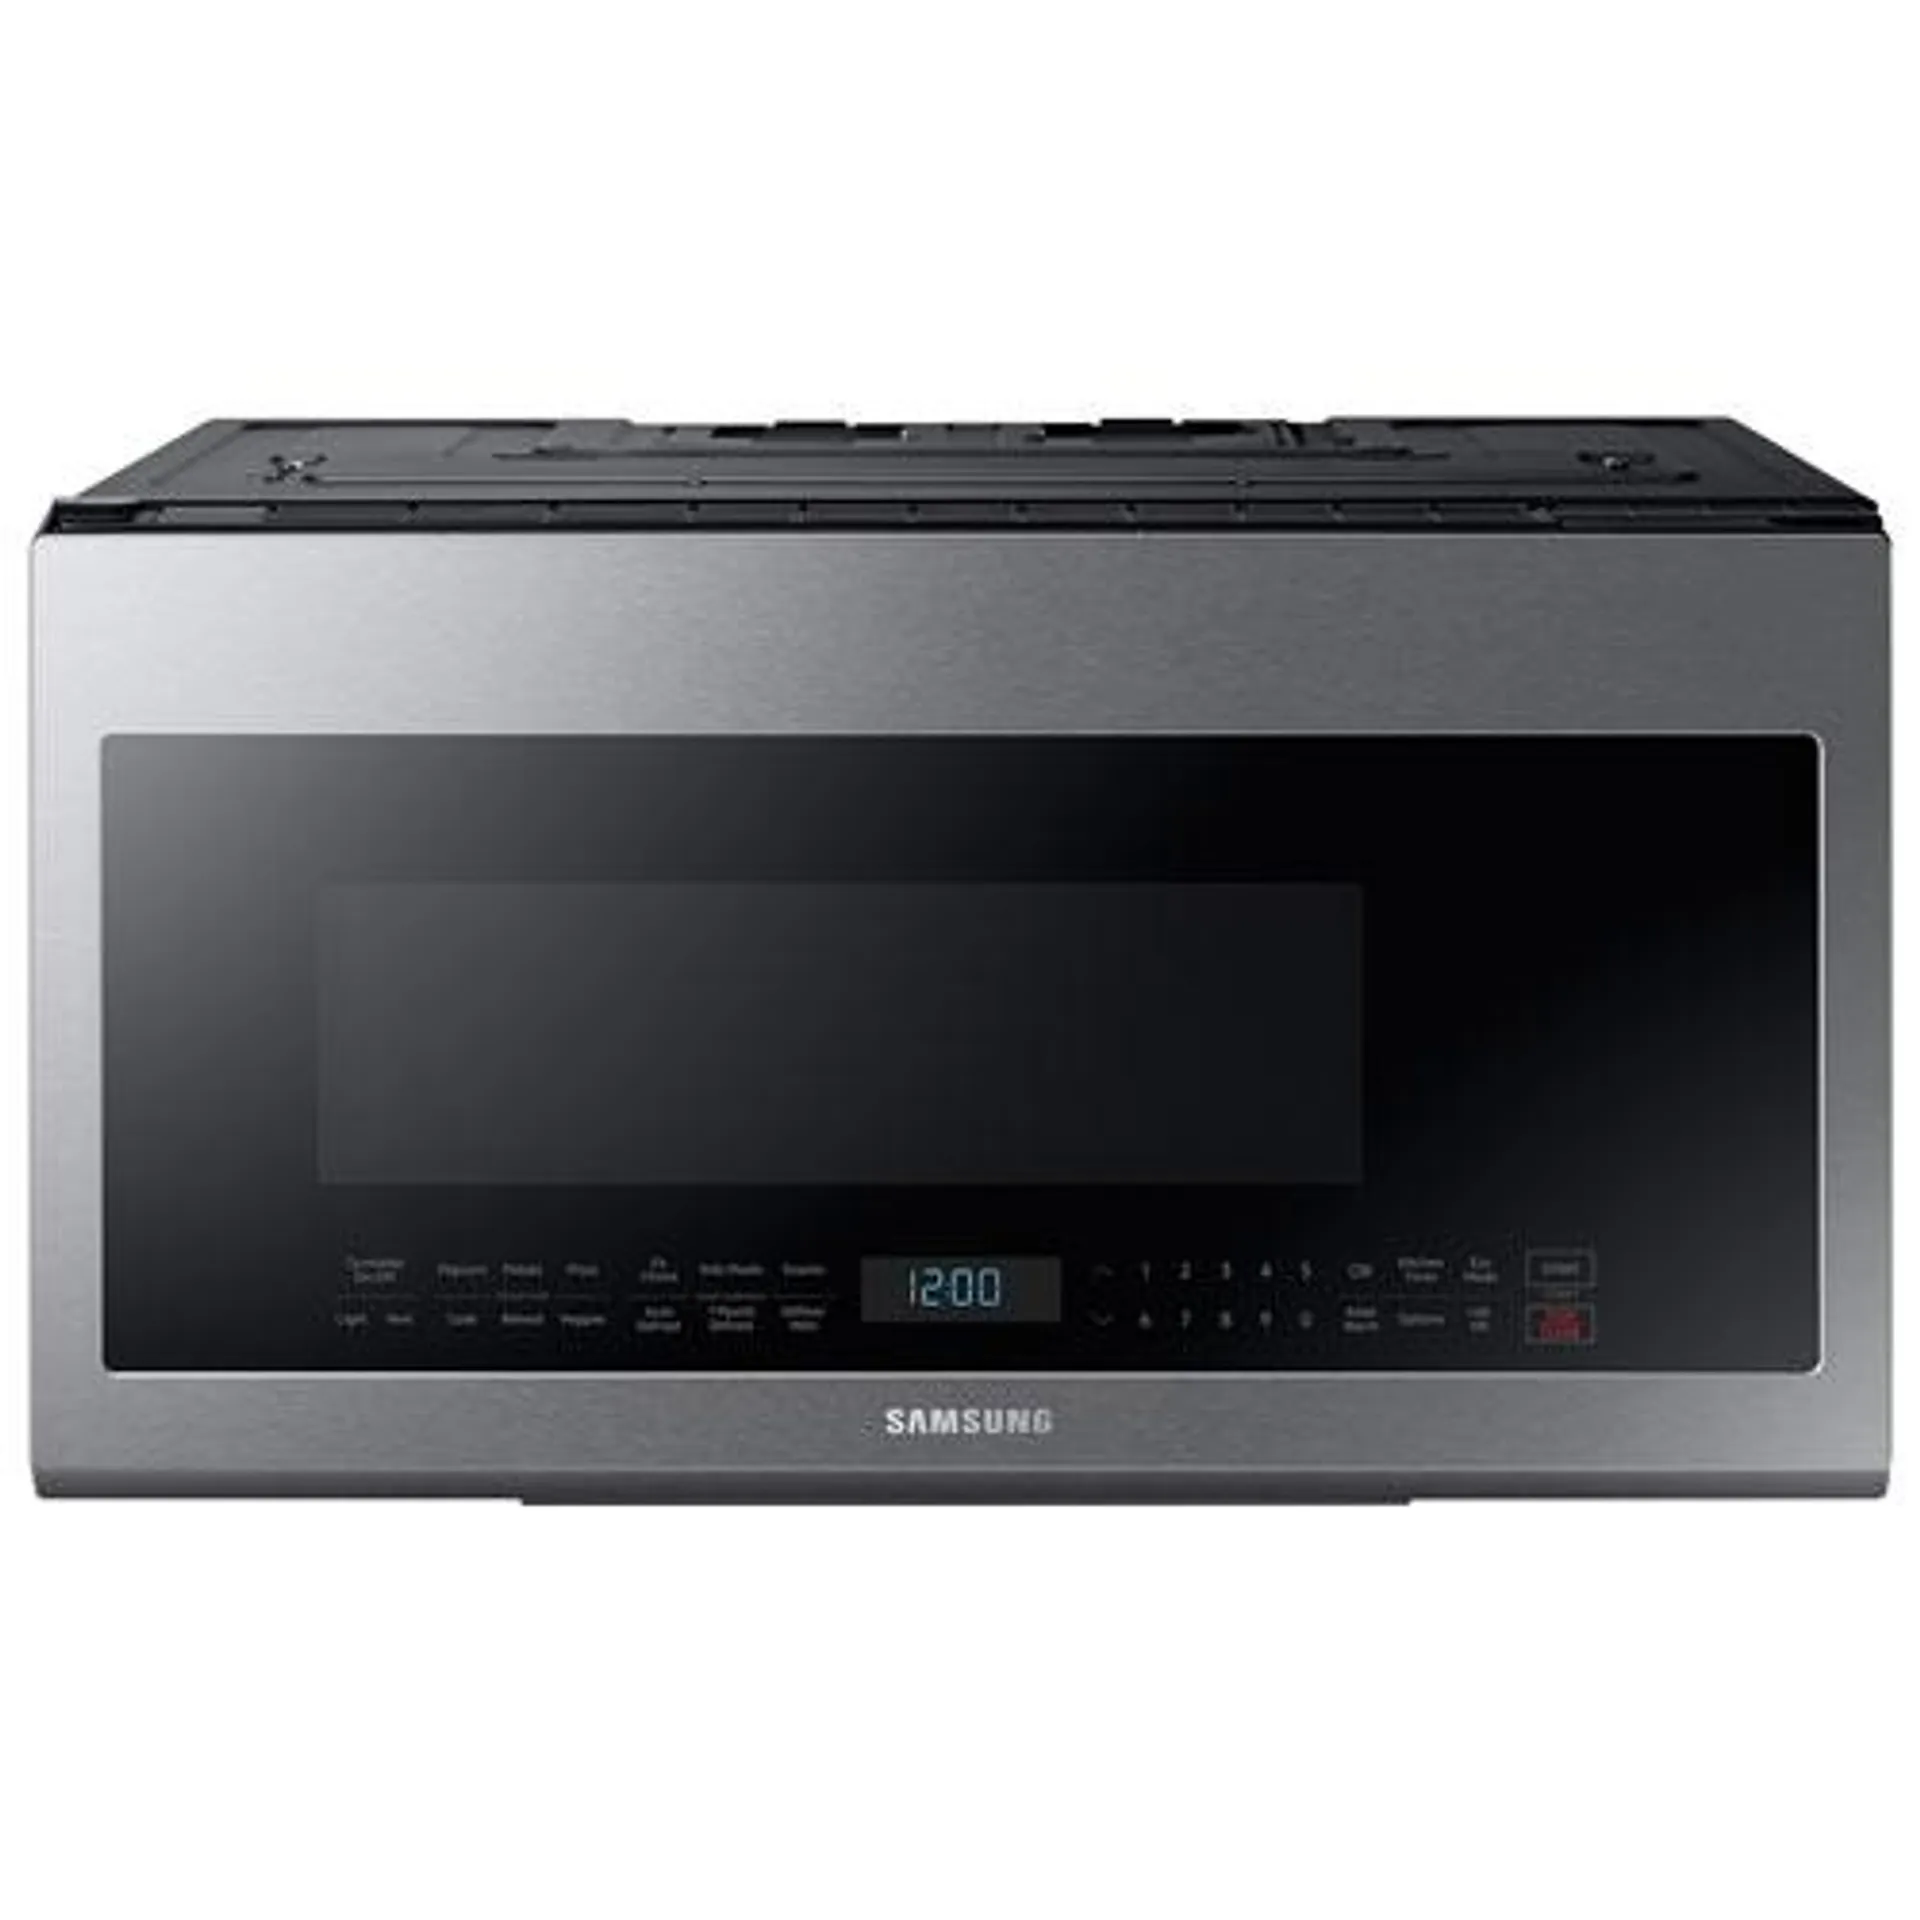 Samsung Over-The-Range Microwave - 2.1 Cu. Ft. - Stainless Steel